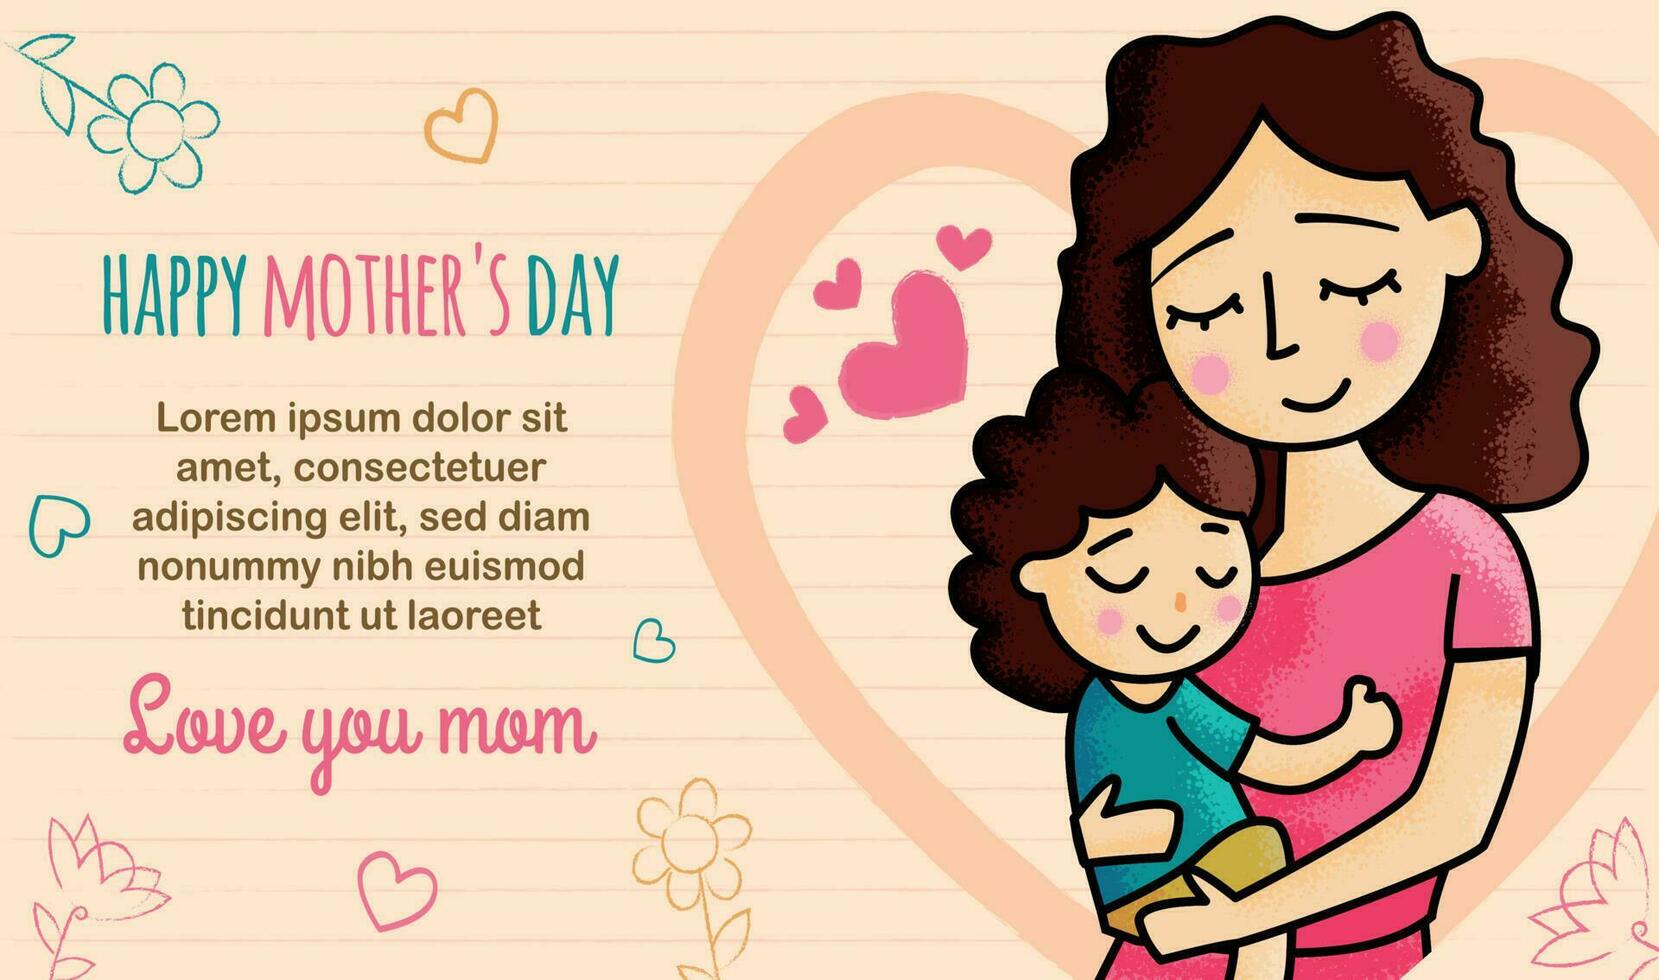 Mothers day banners template children with mom hug illustration vector